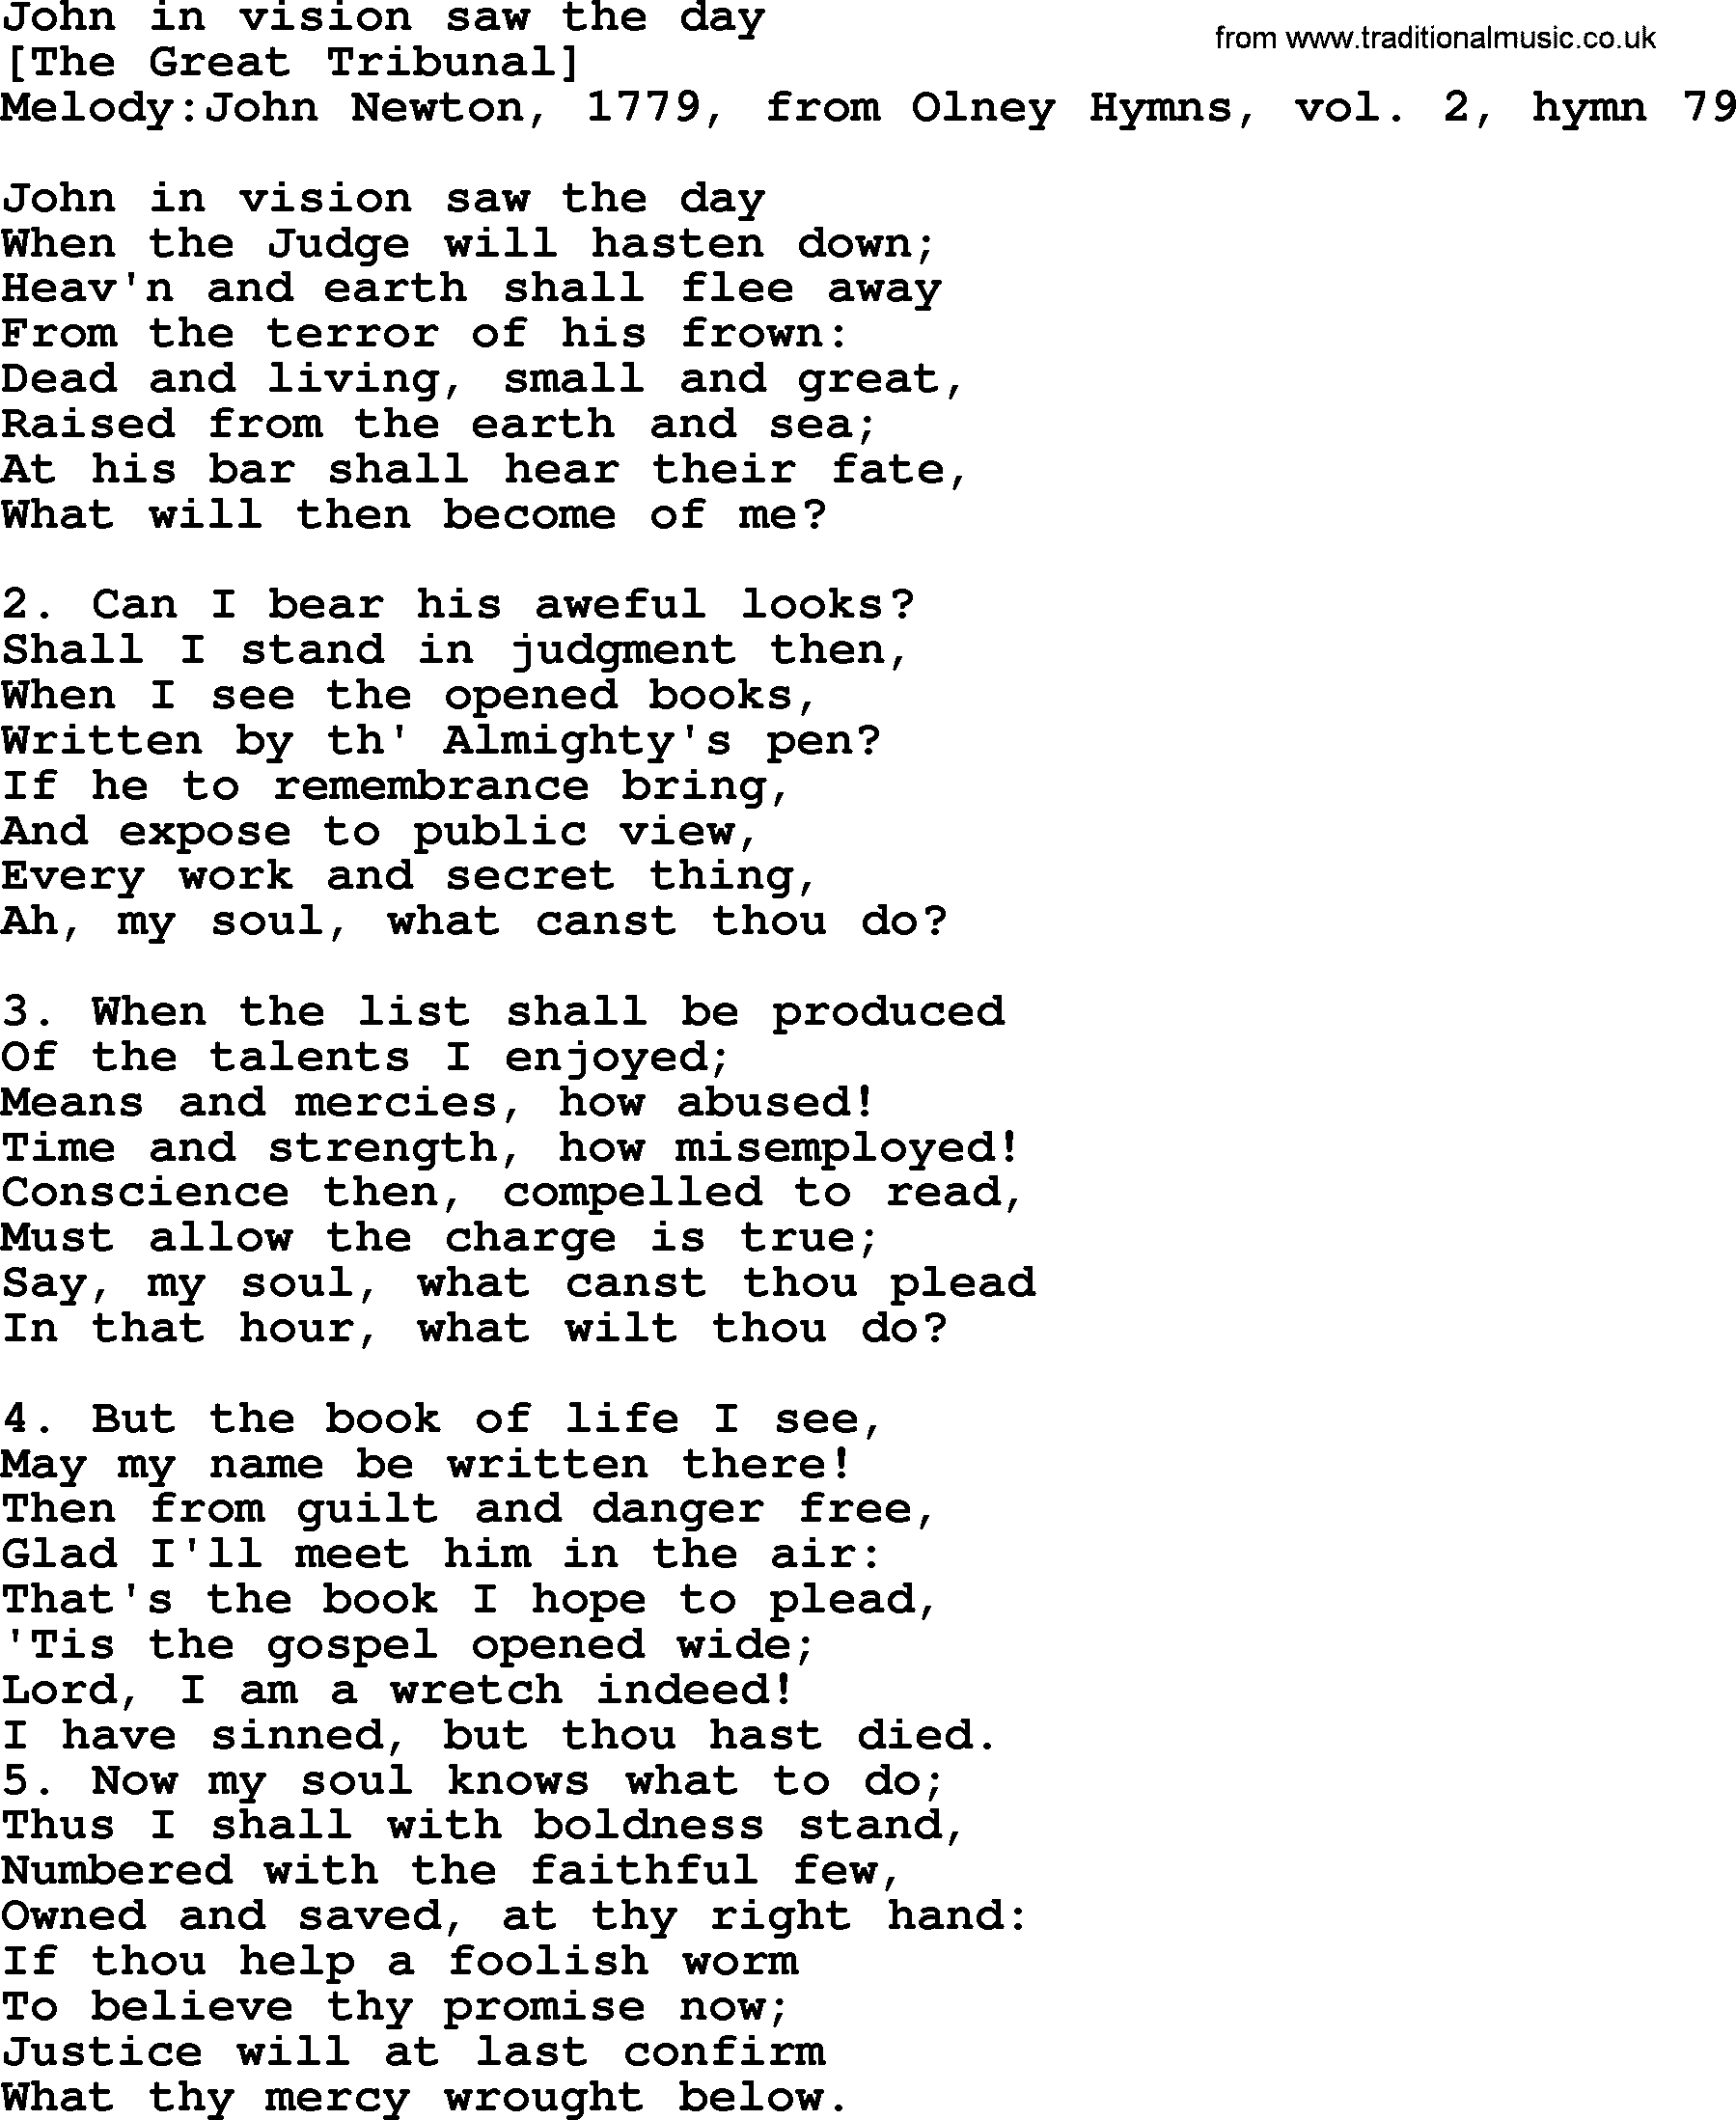 Old English Song: John In Vision Saw The Day lyrics